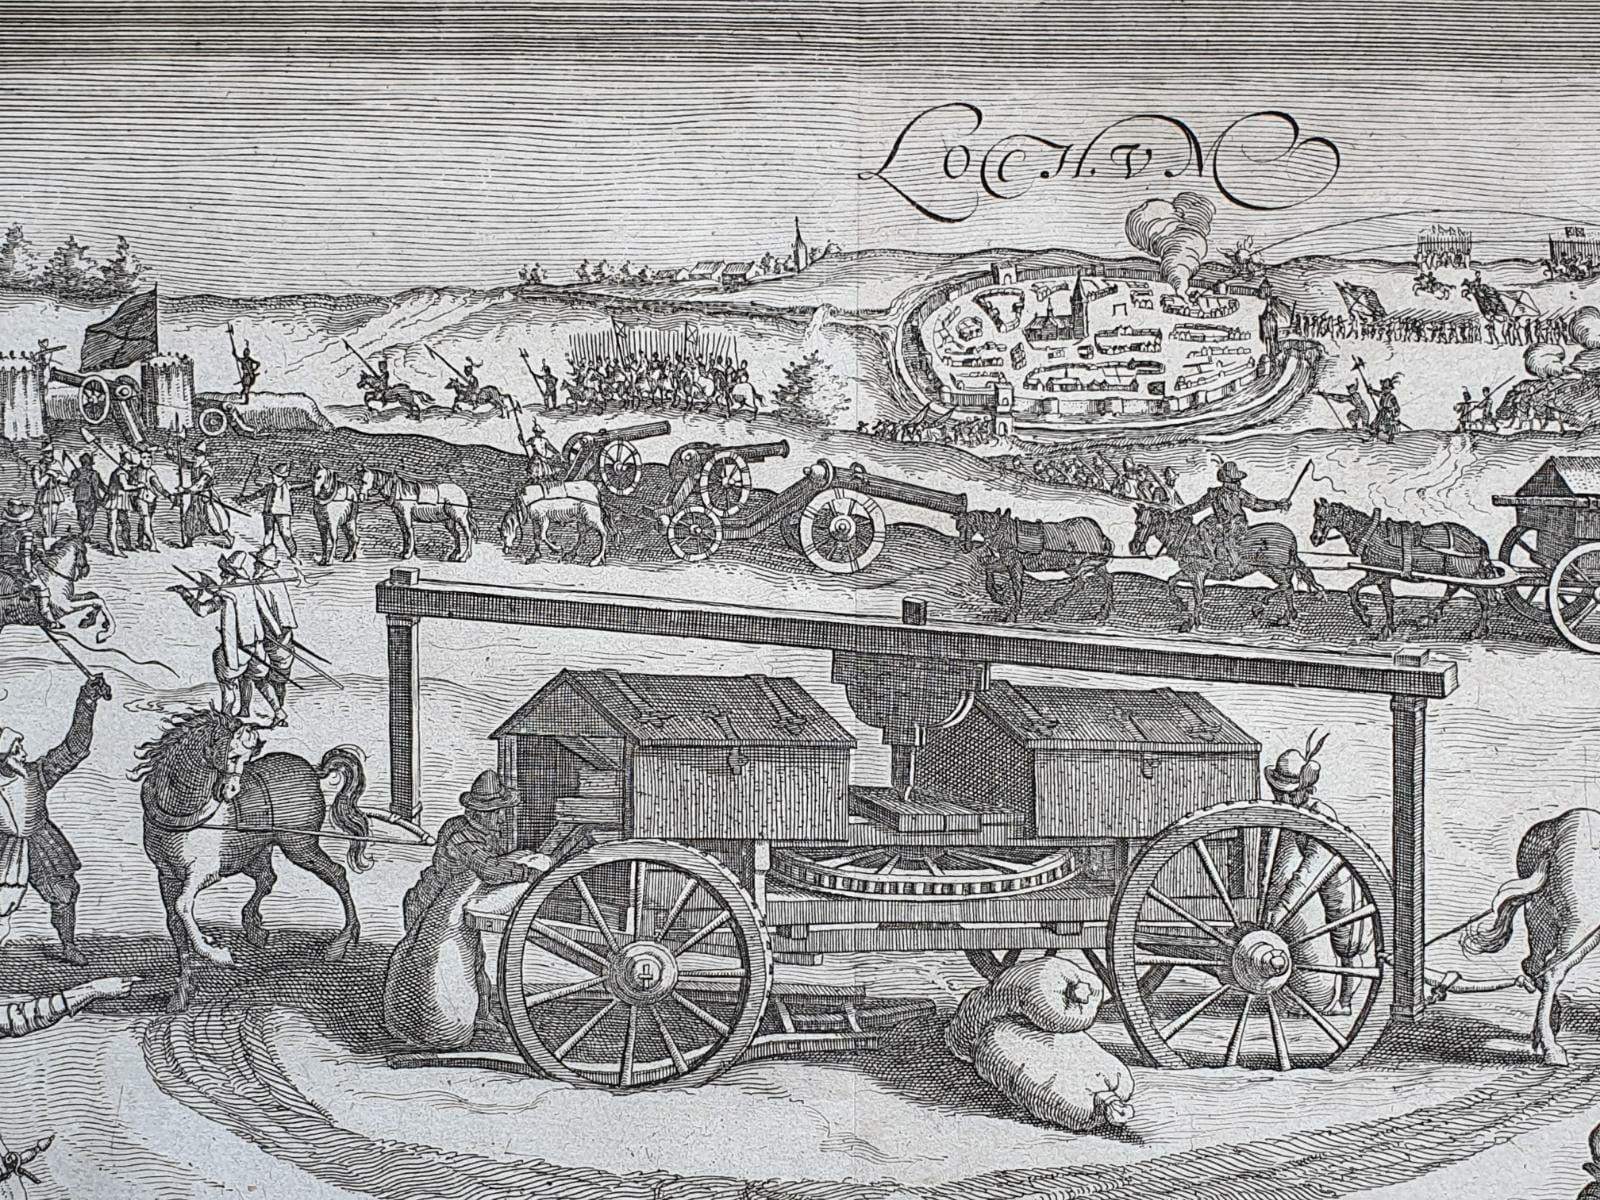 [Antique etching and engraving, ets en gravure, print] Monogrammist HVD, Capture of Lochem by Spinola and the flour carts in his army in 1606, published before 1650.